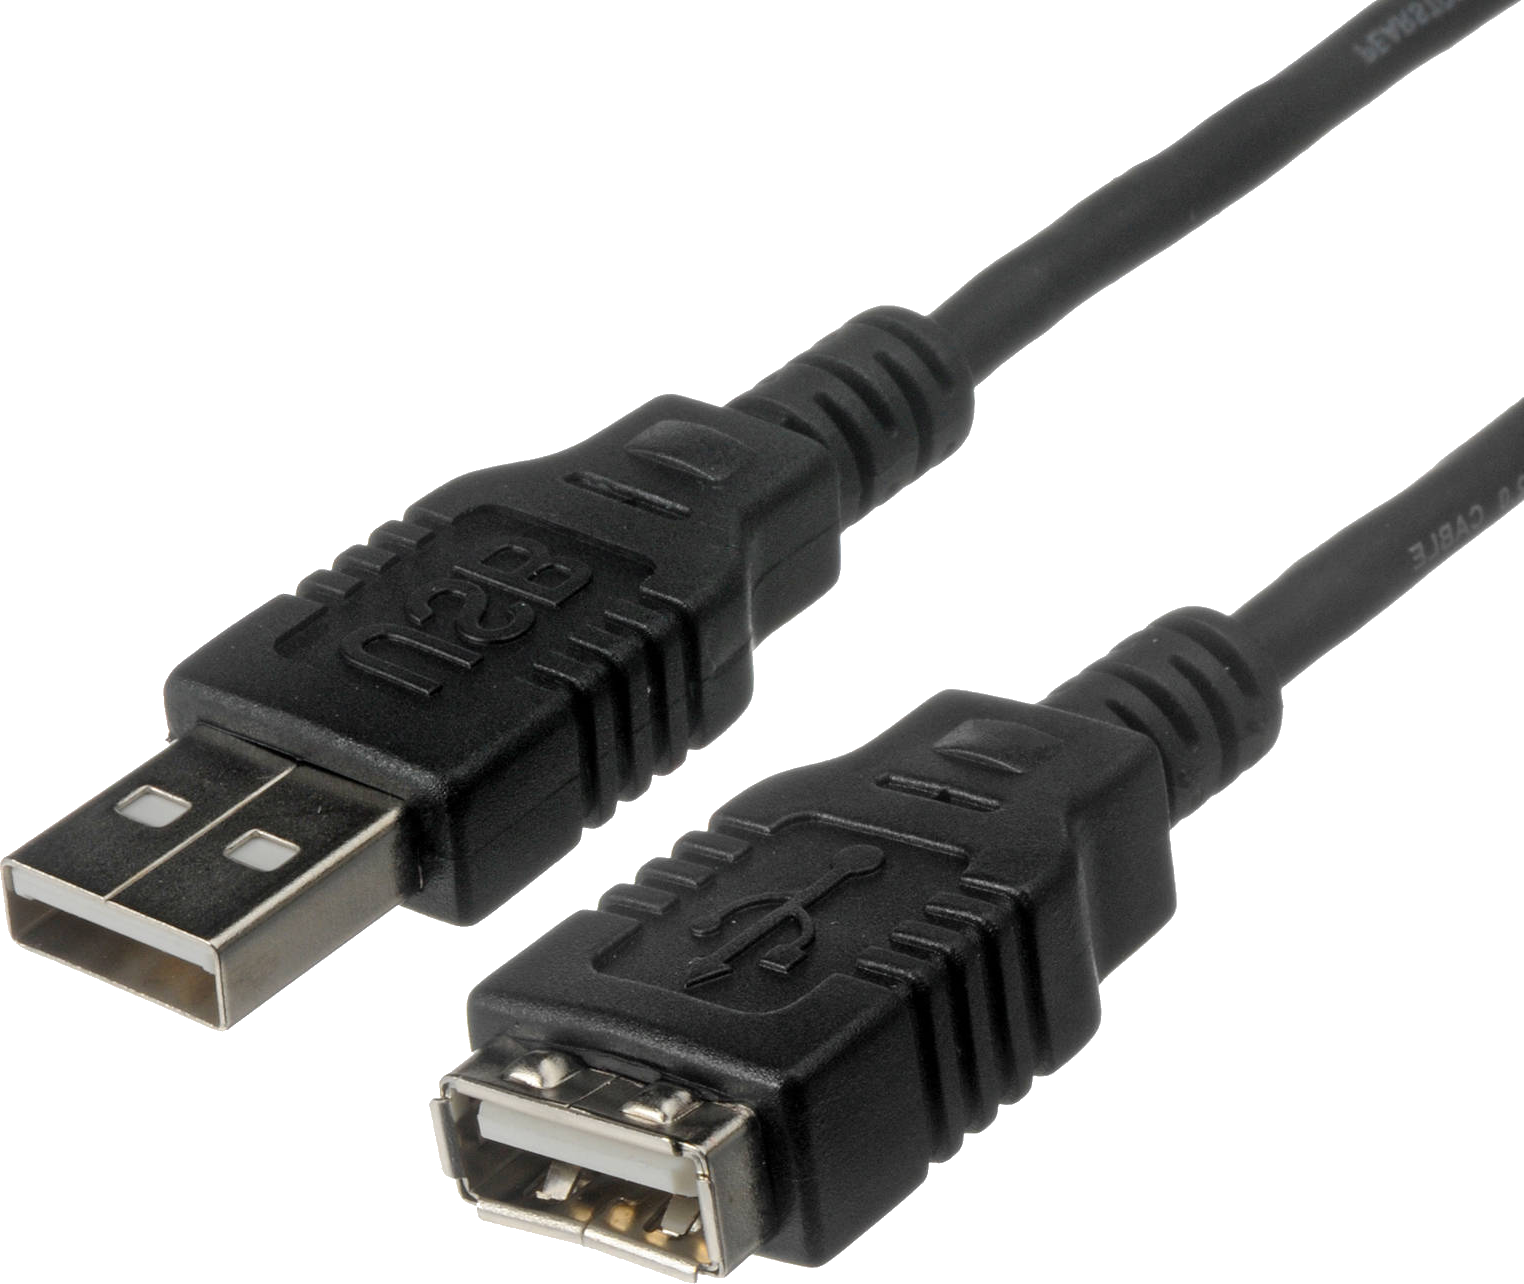 16-6516 USB 2.0 A Male to A Female Extension Cable